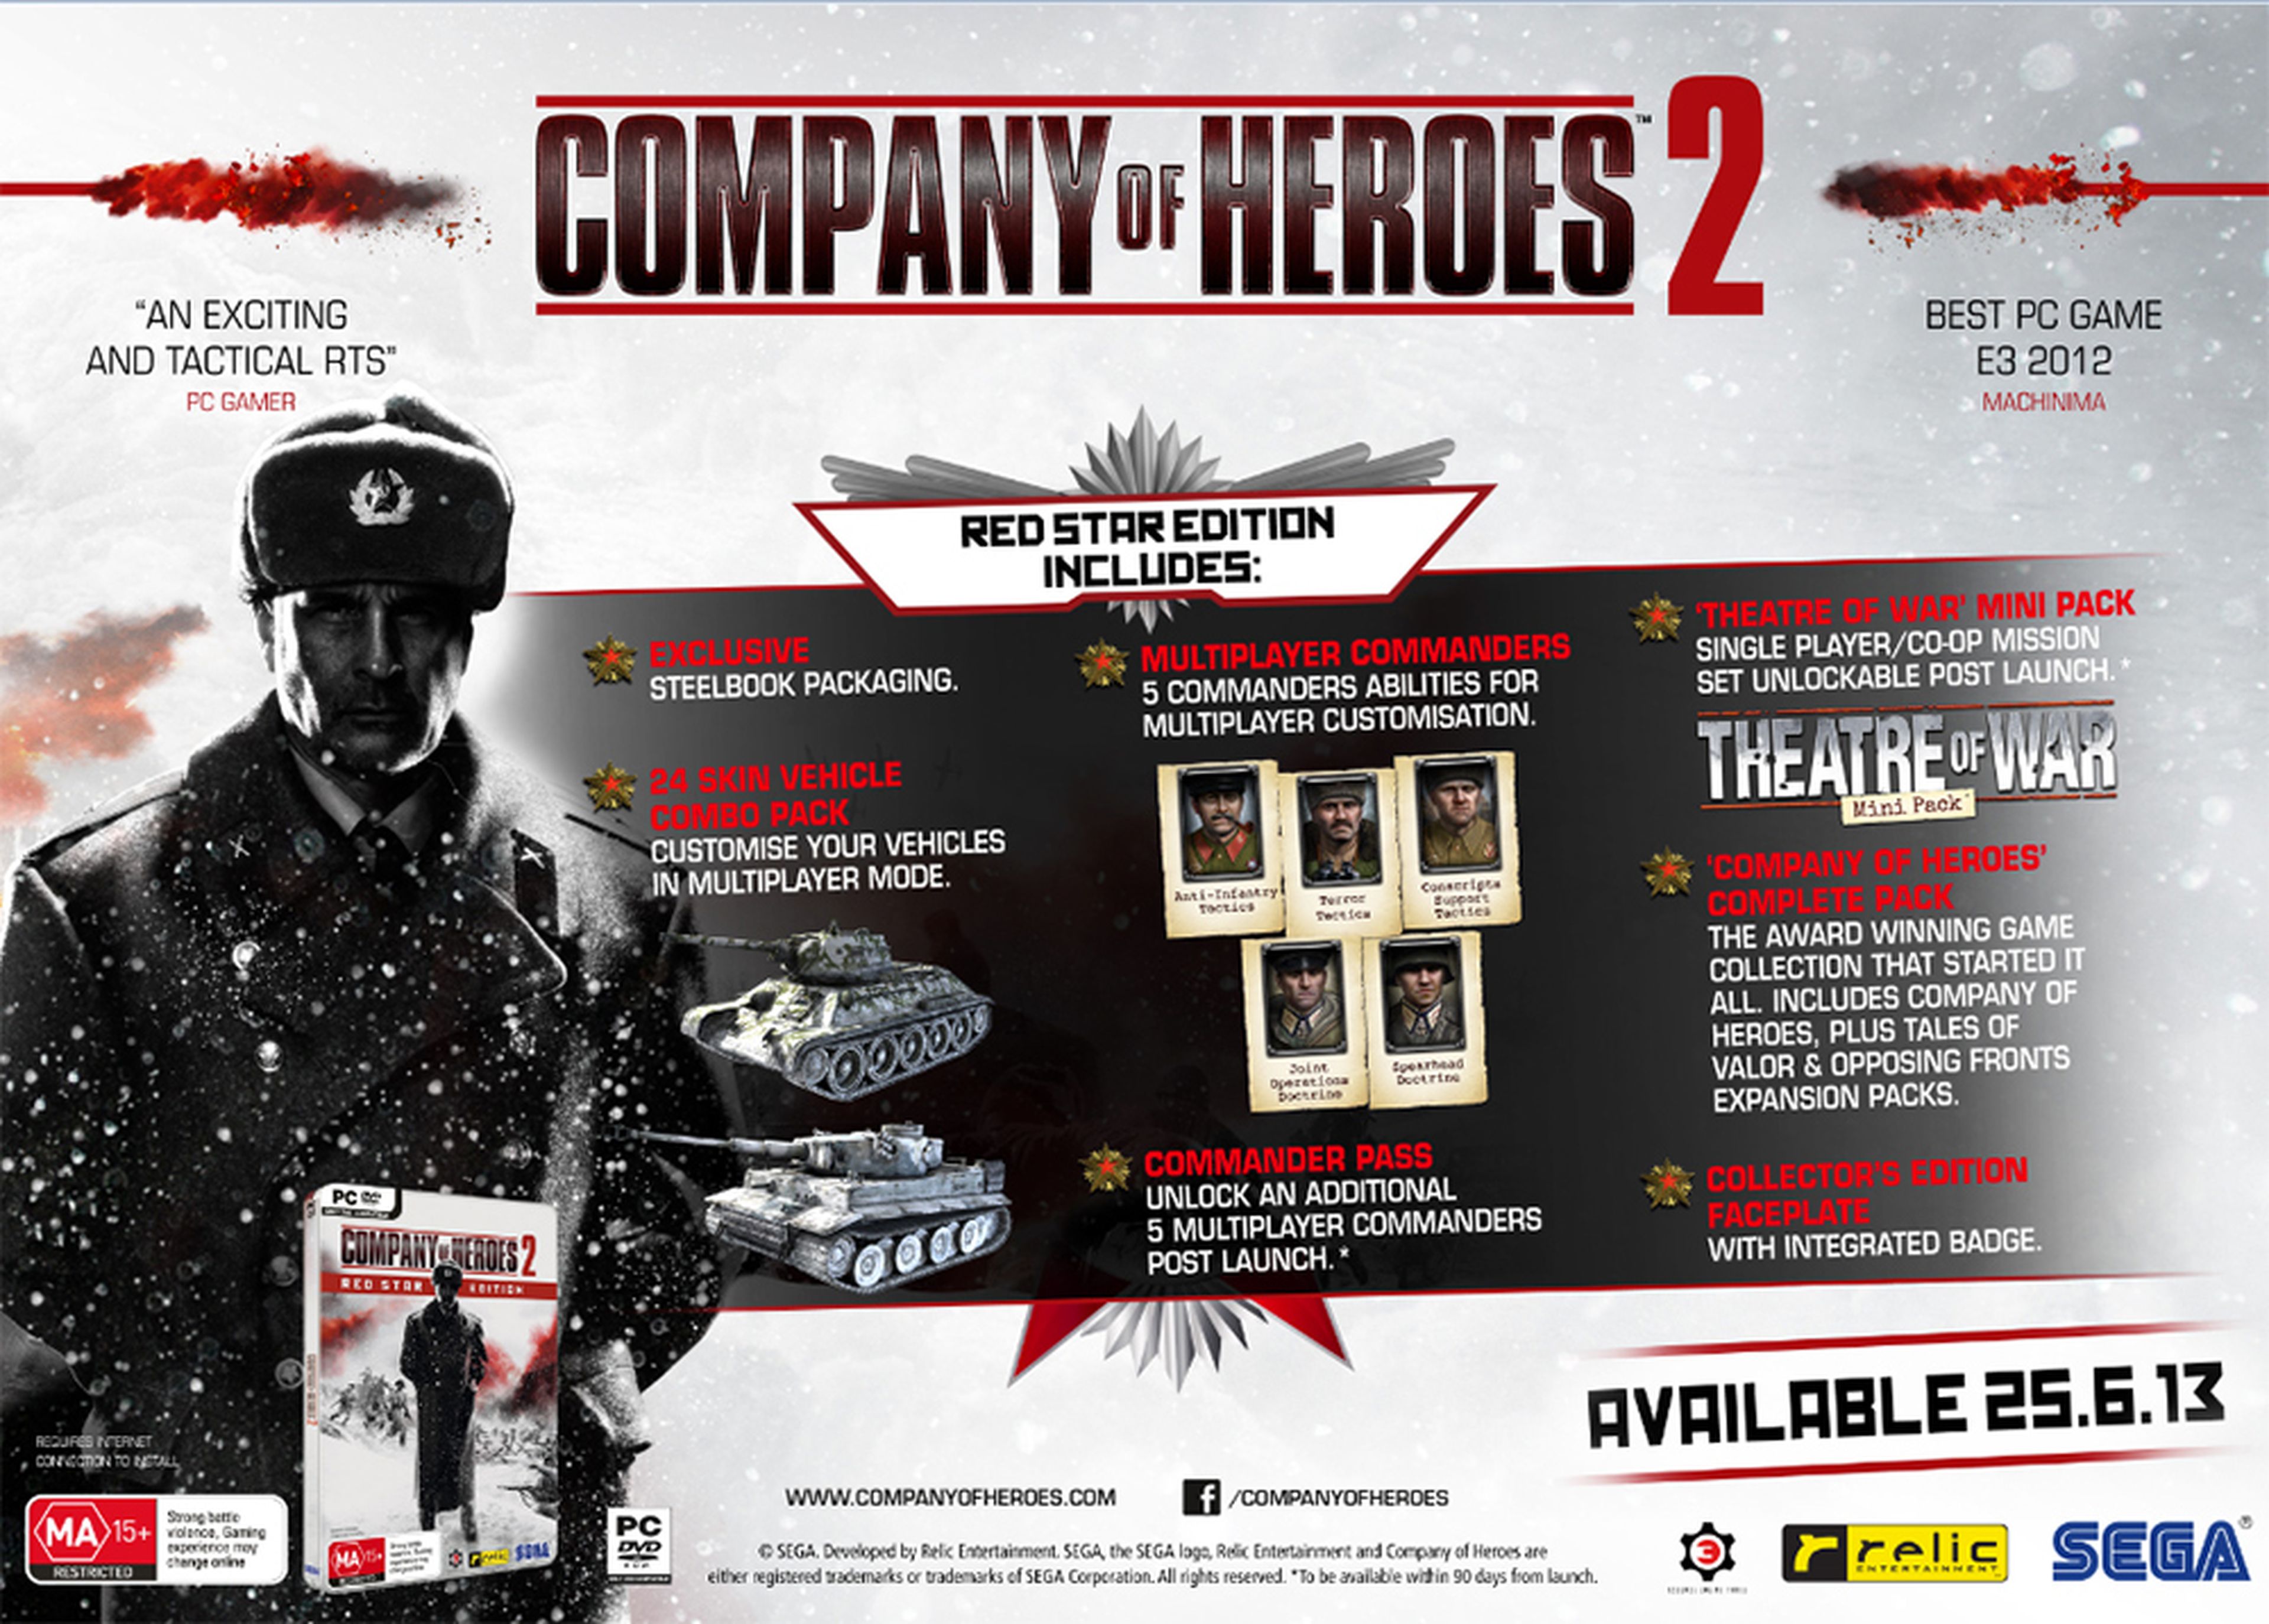 Company of Heroes 2 Red Star Edition